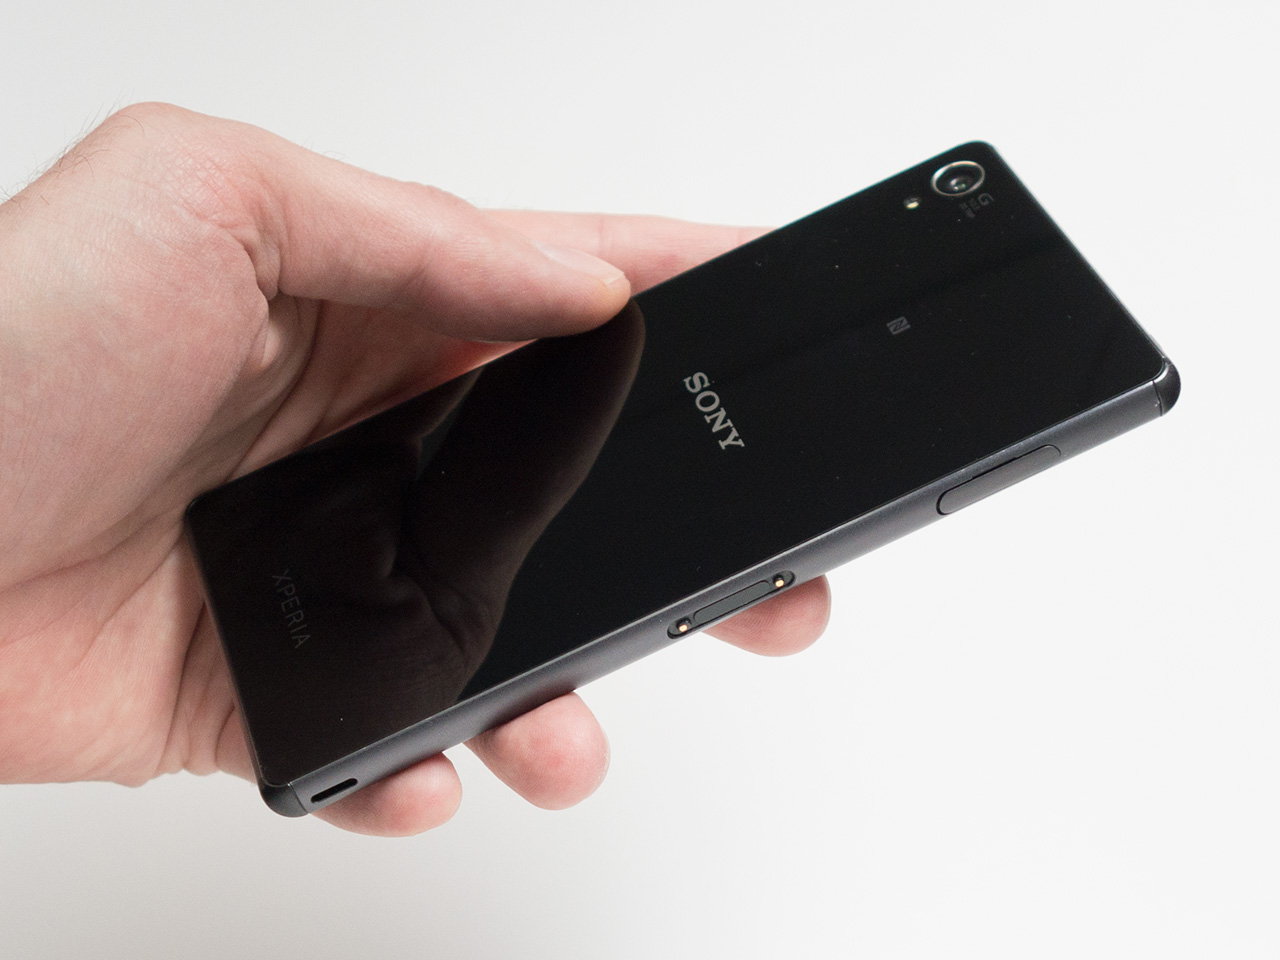 xperia-z3-nfc-settings-permanent-stop-guide